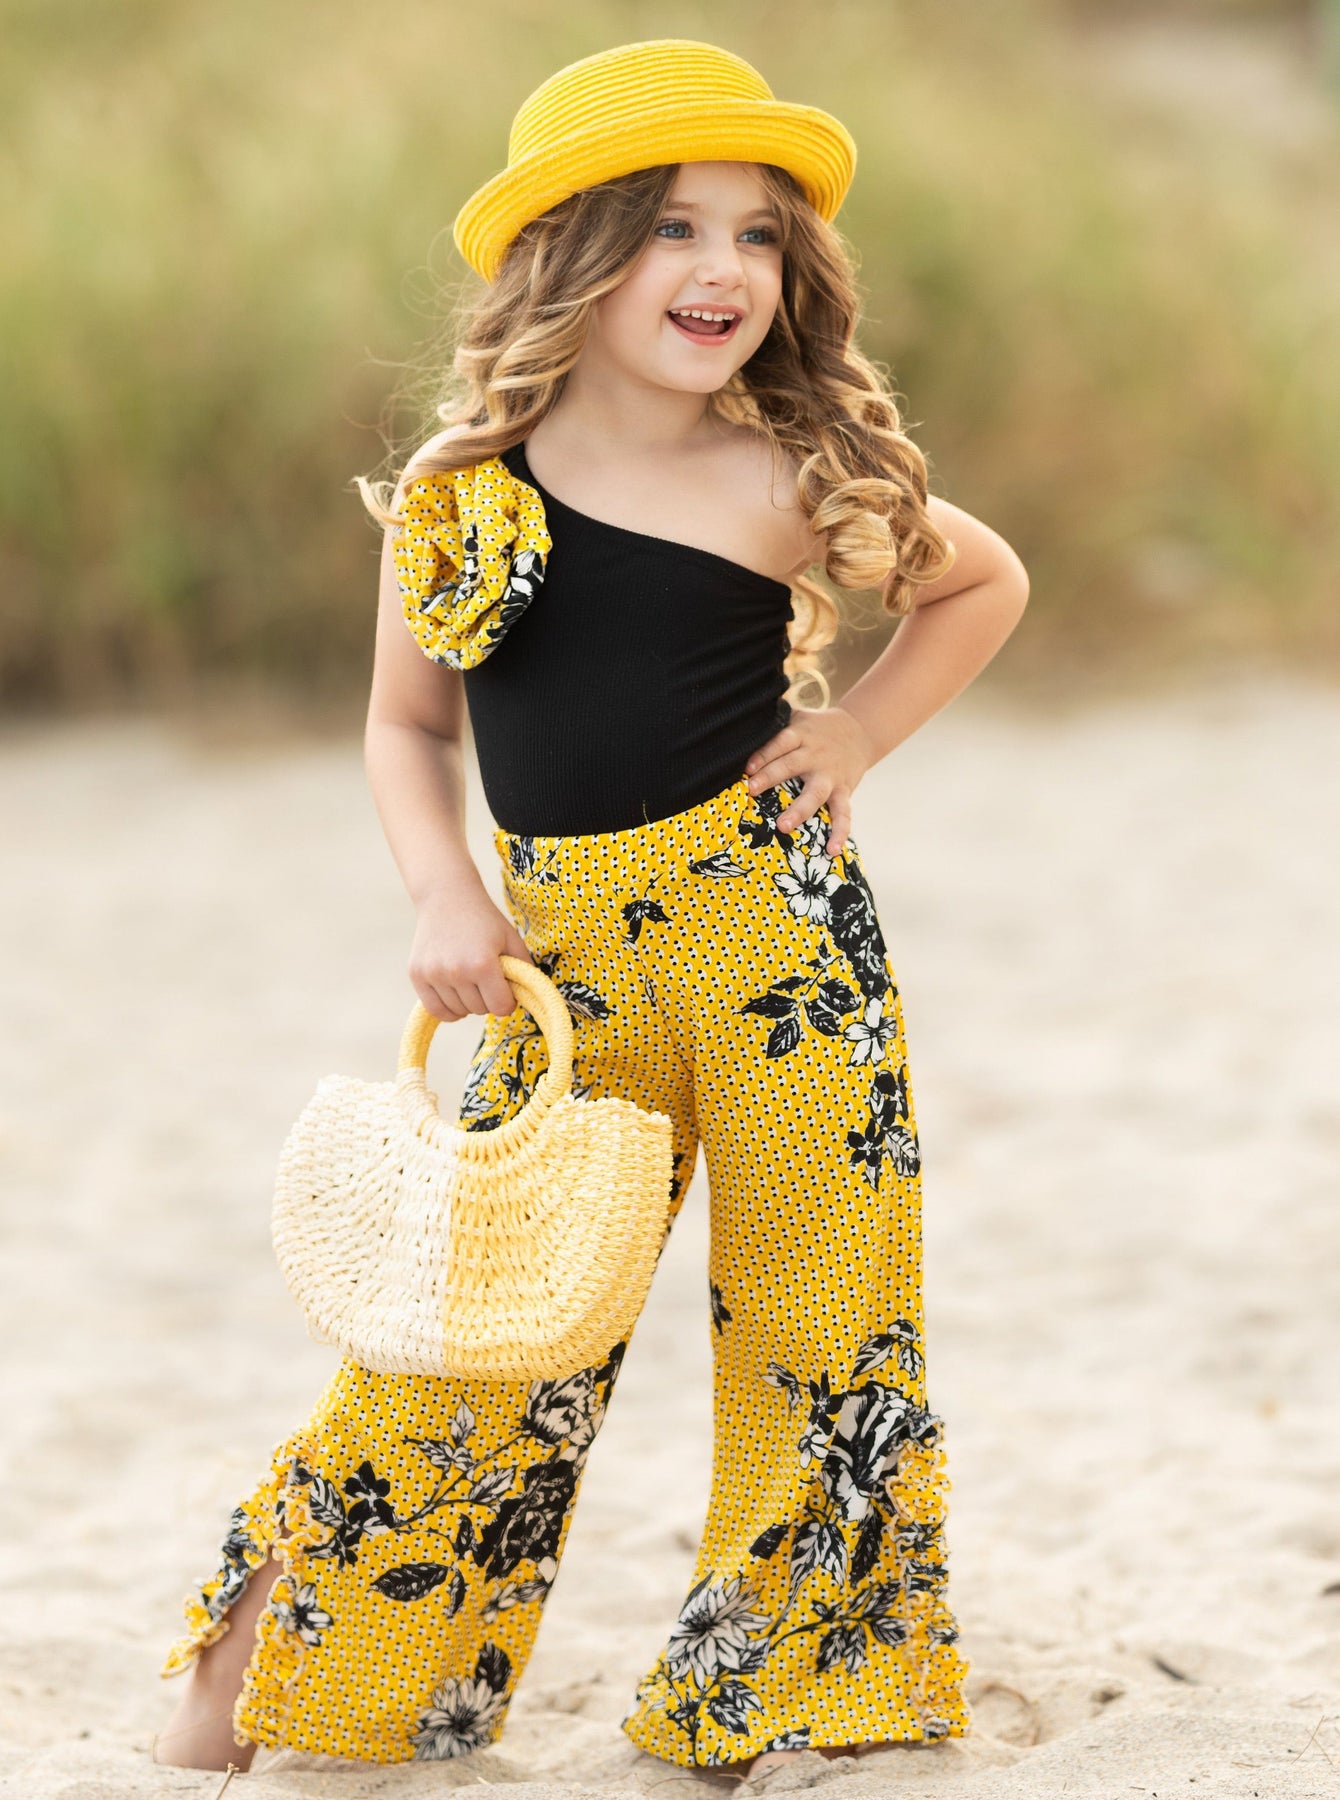 Girls Wide Leg Denim Shorts Casual Wide Leg Jeans Women For Spring And  Summer Outwear, Long Pants For Teens And Children Style #230520 From  Deng07, $13.04 | DHgate.Com